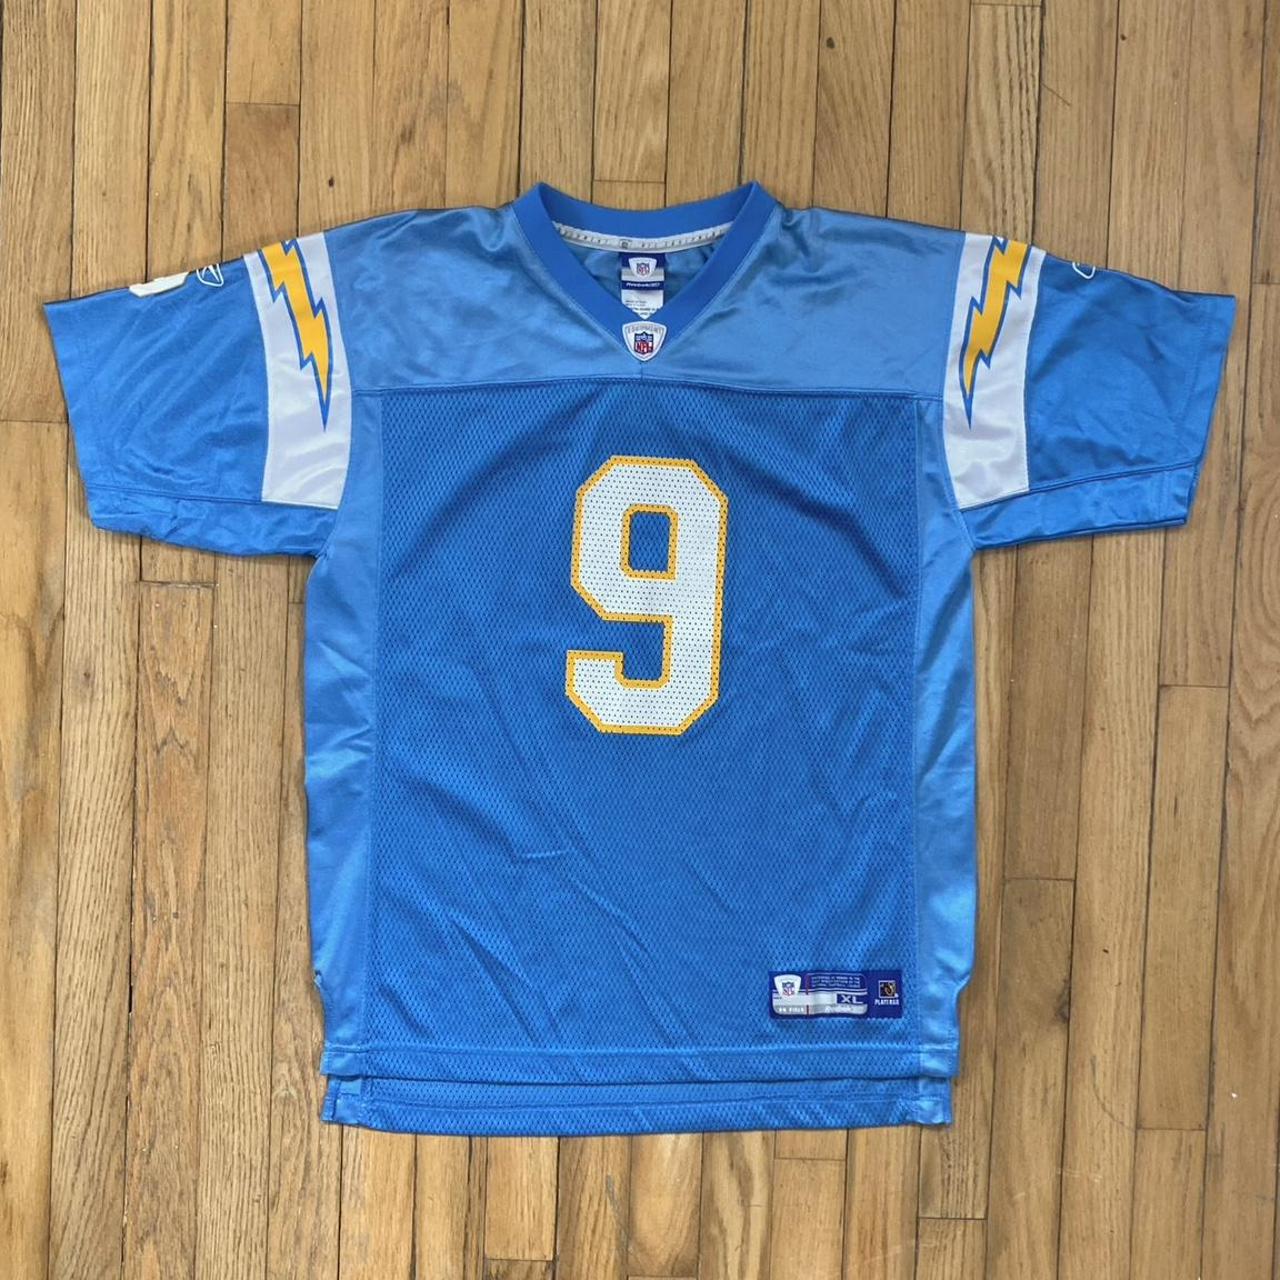 drew brees chargers jersey